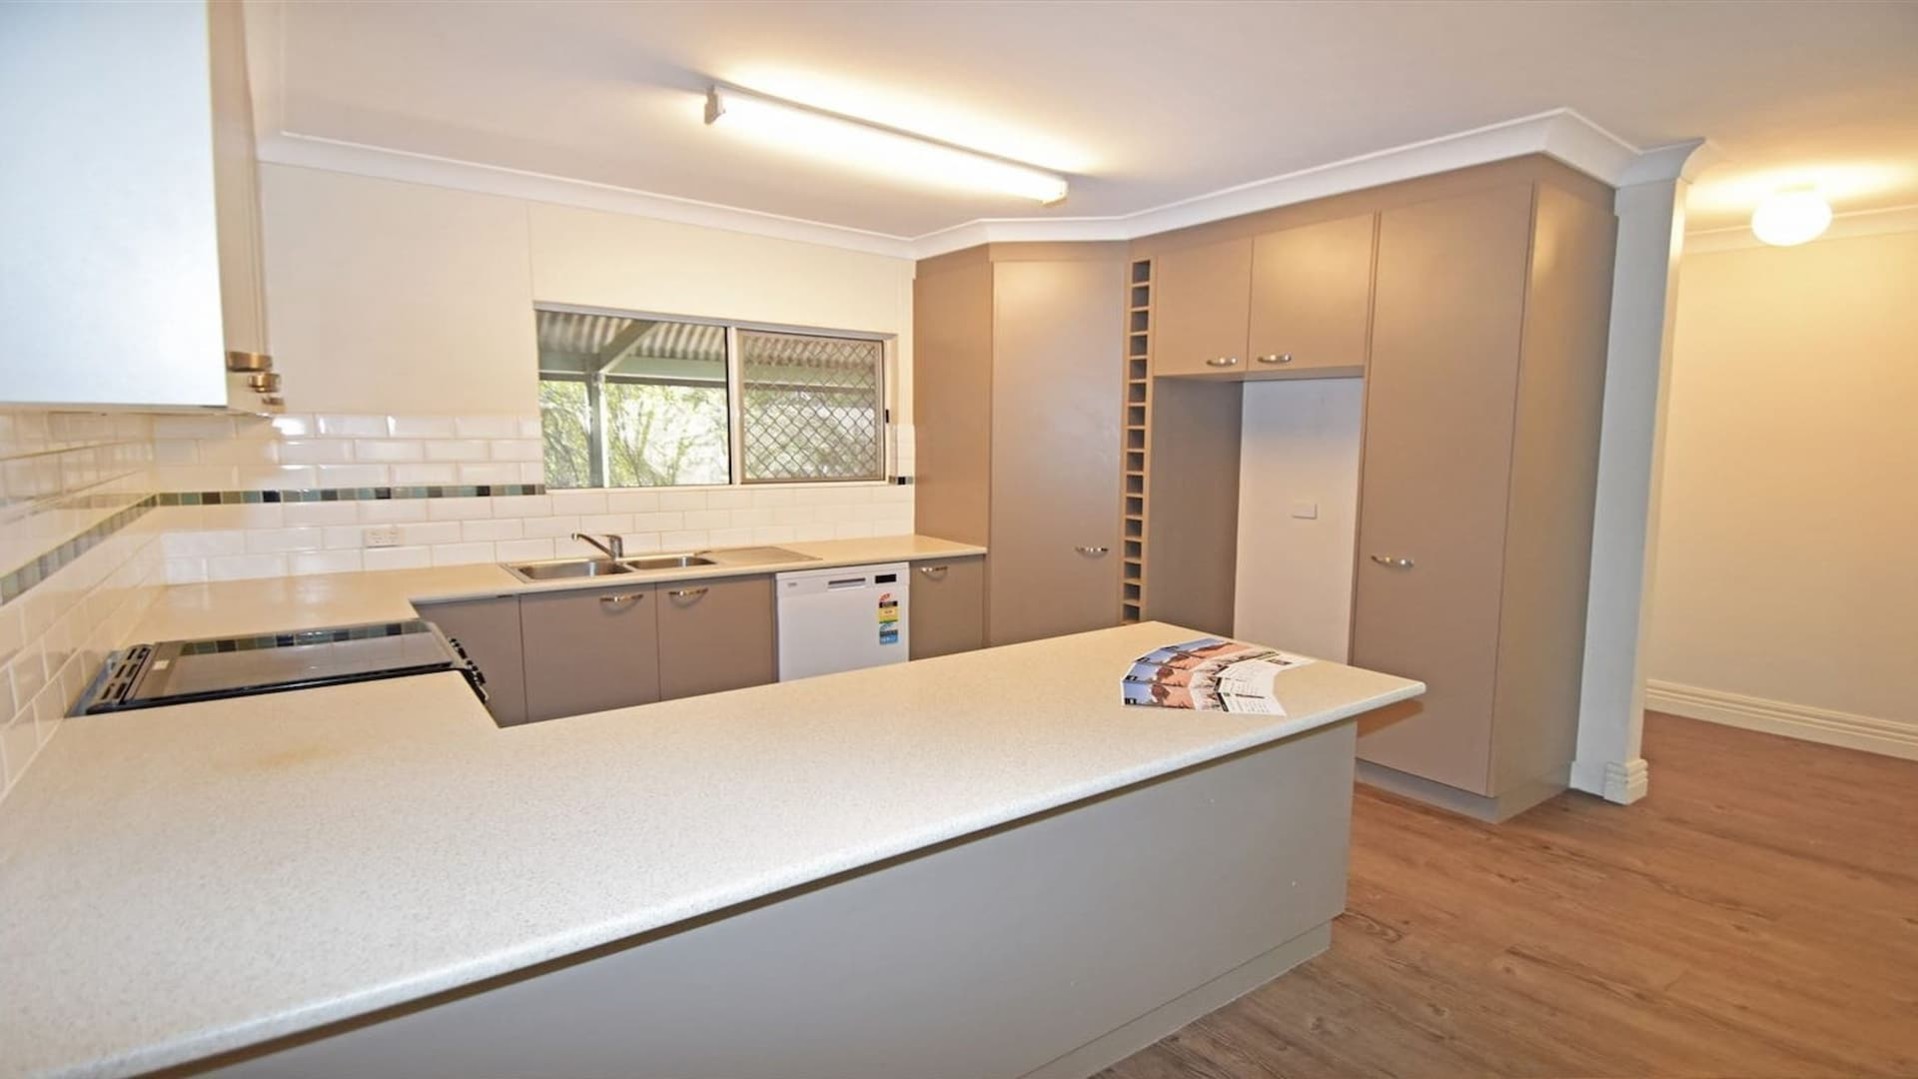 u-shaped kitchen, with plenty of bench space and cupboards for storage.